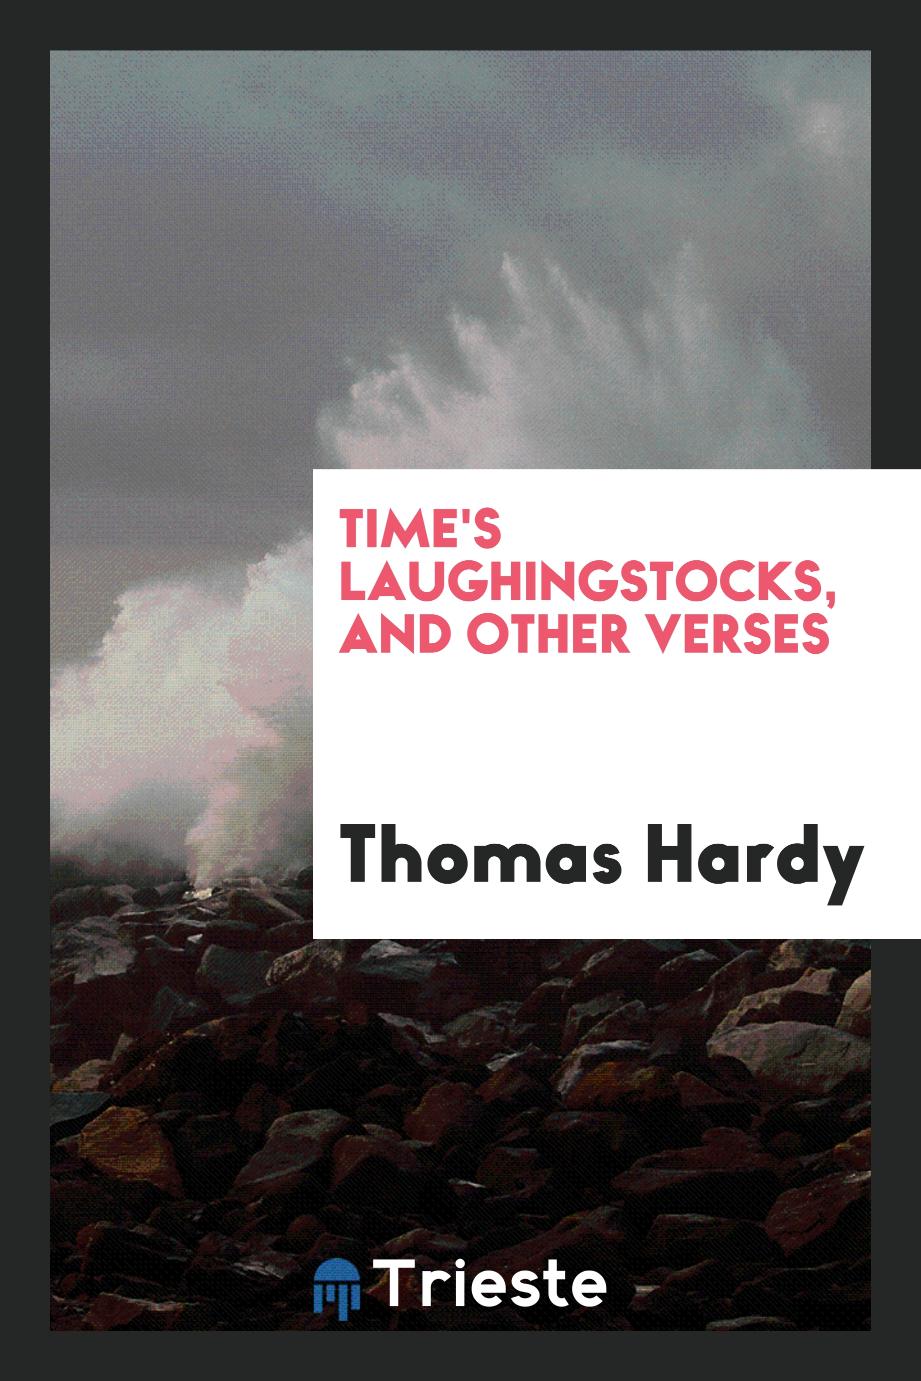 Time's laughingstocks, and other verses